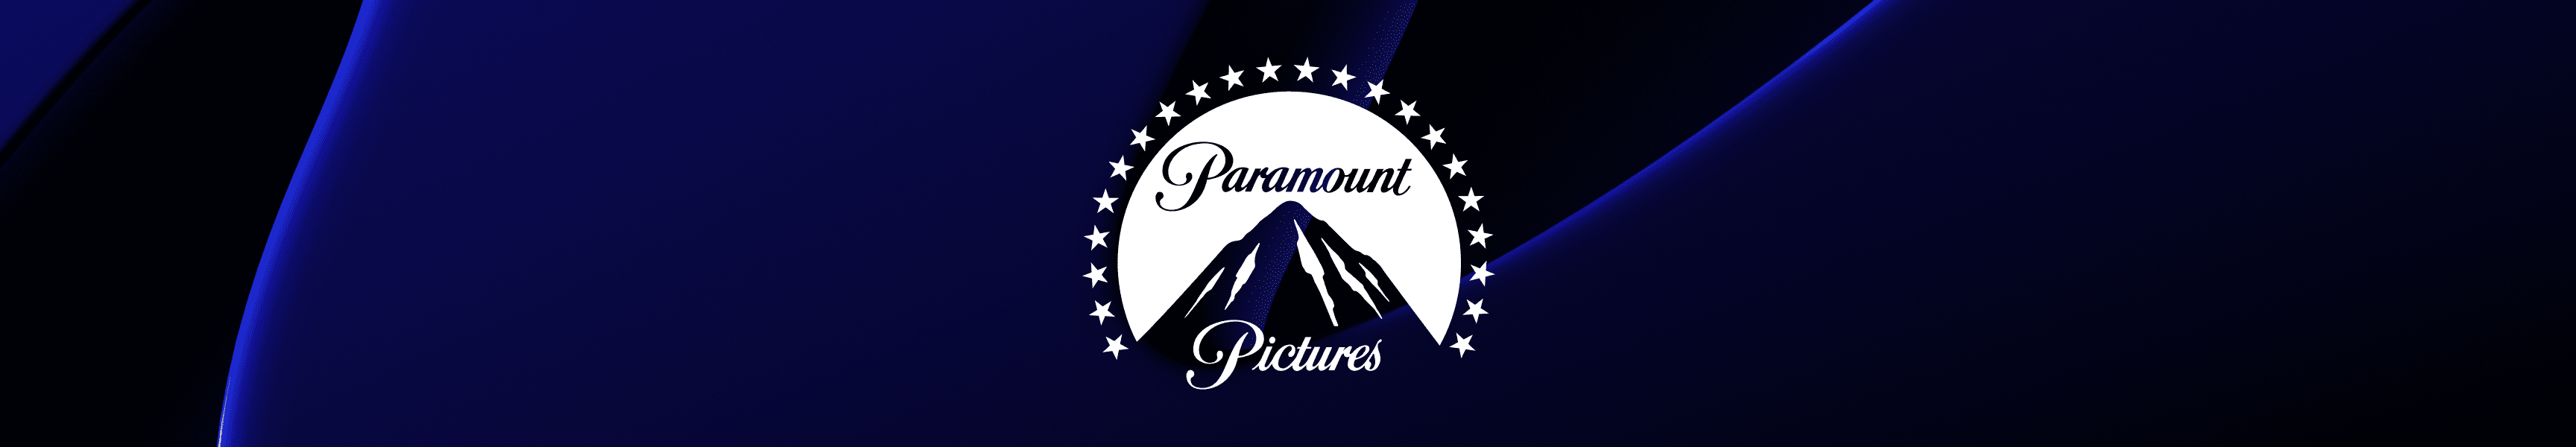 Paramount Pictures Hats